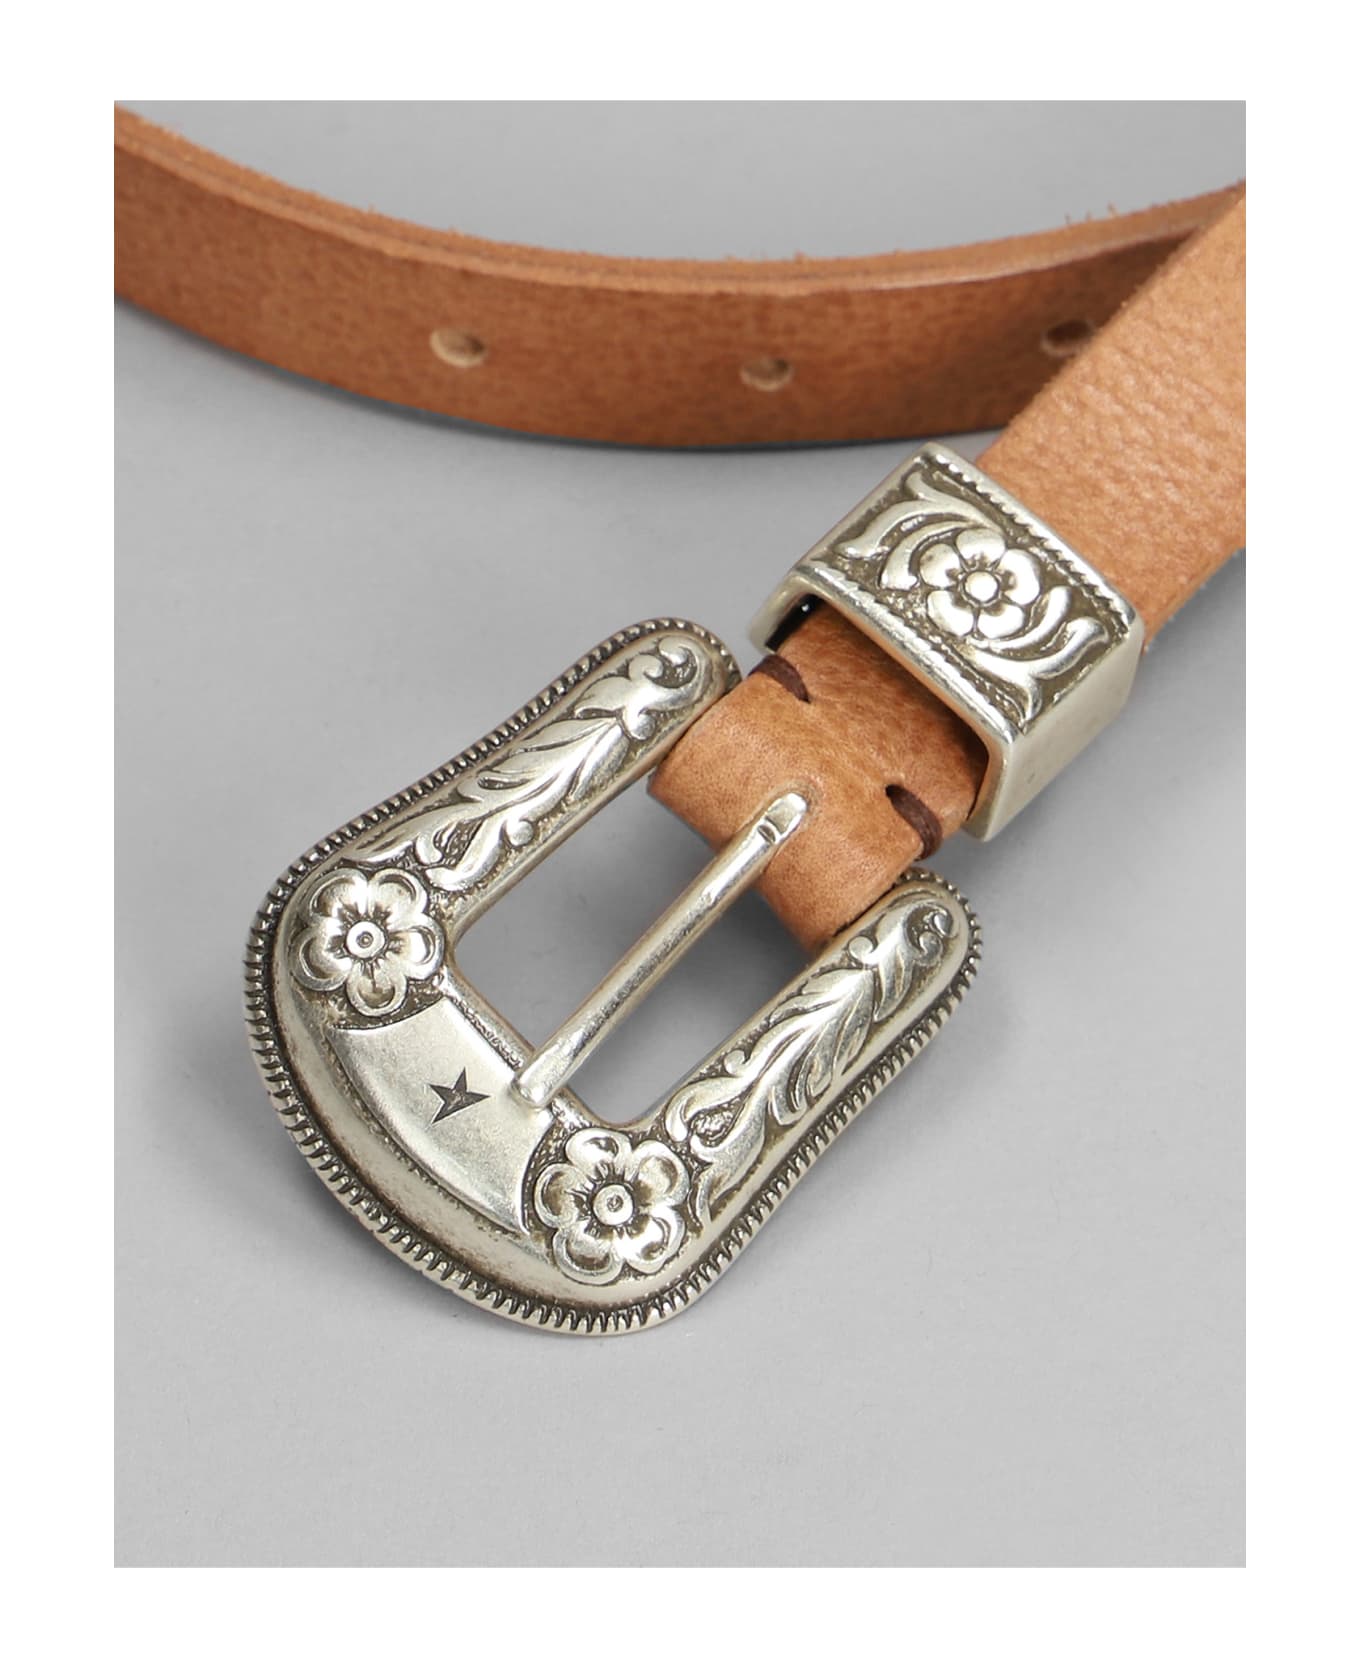 Golden Goose Belts In Leather Color Leather - leather color ベルト